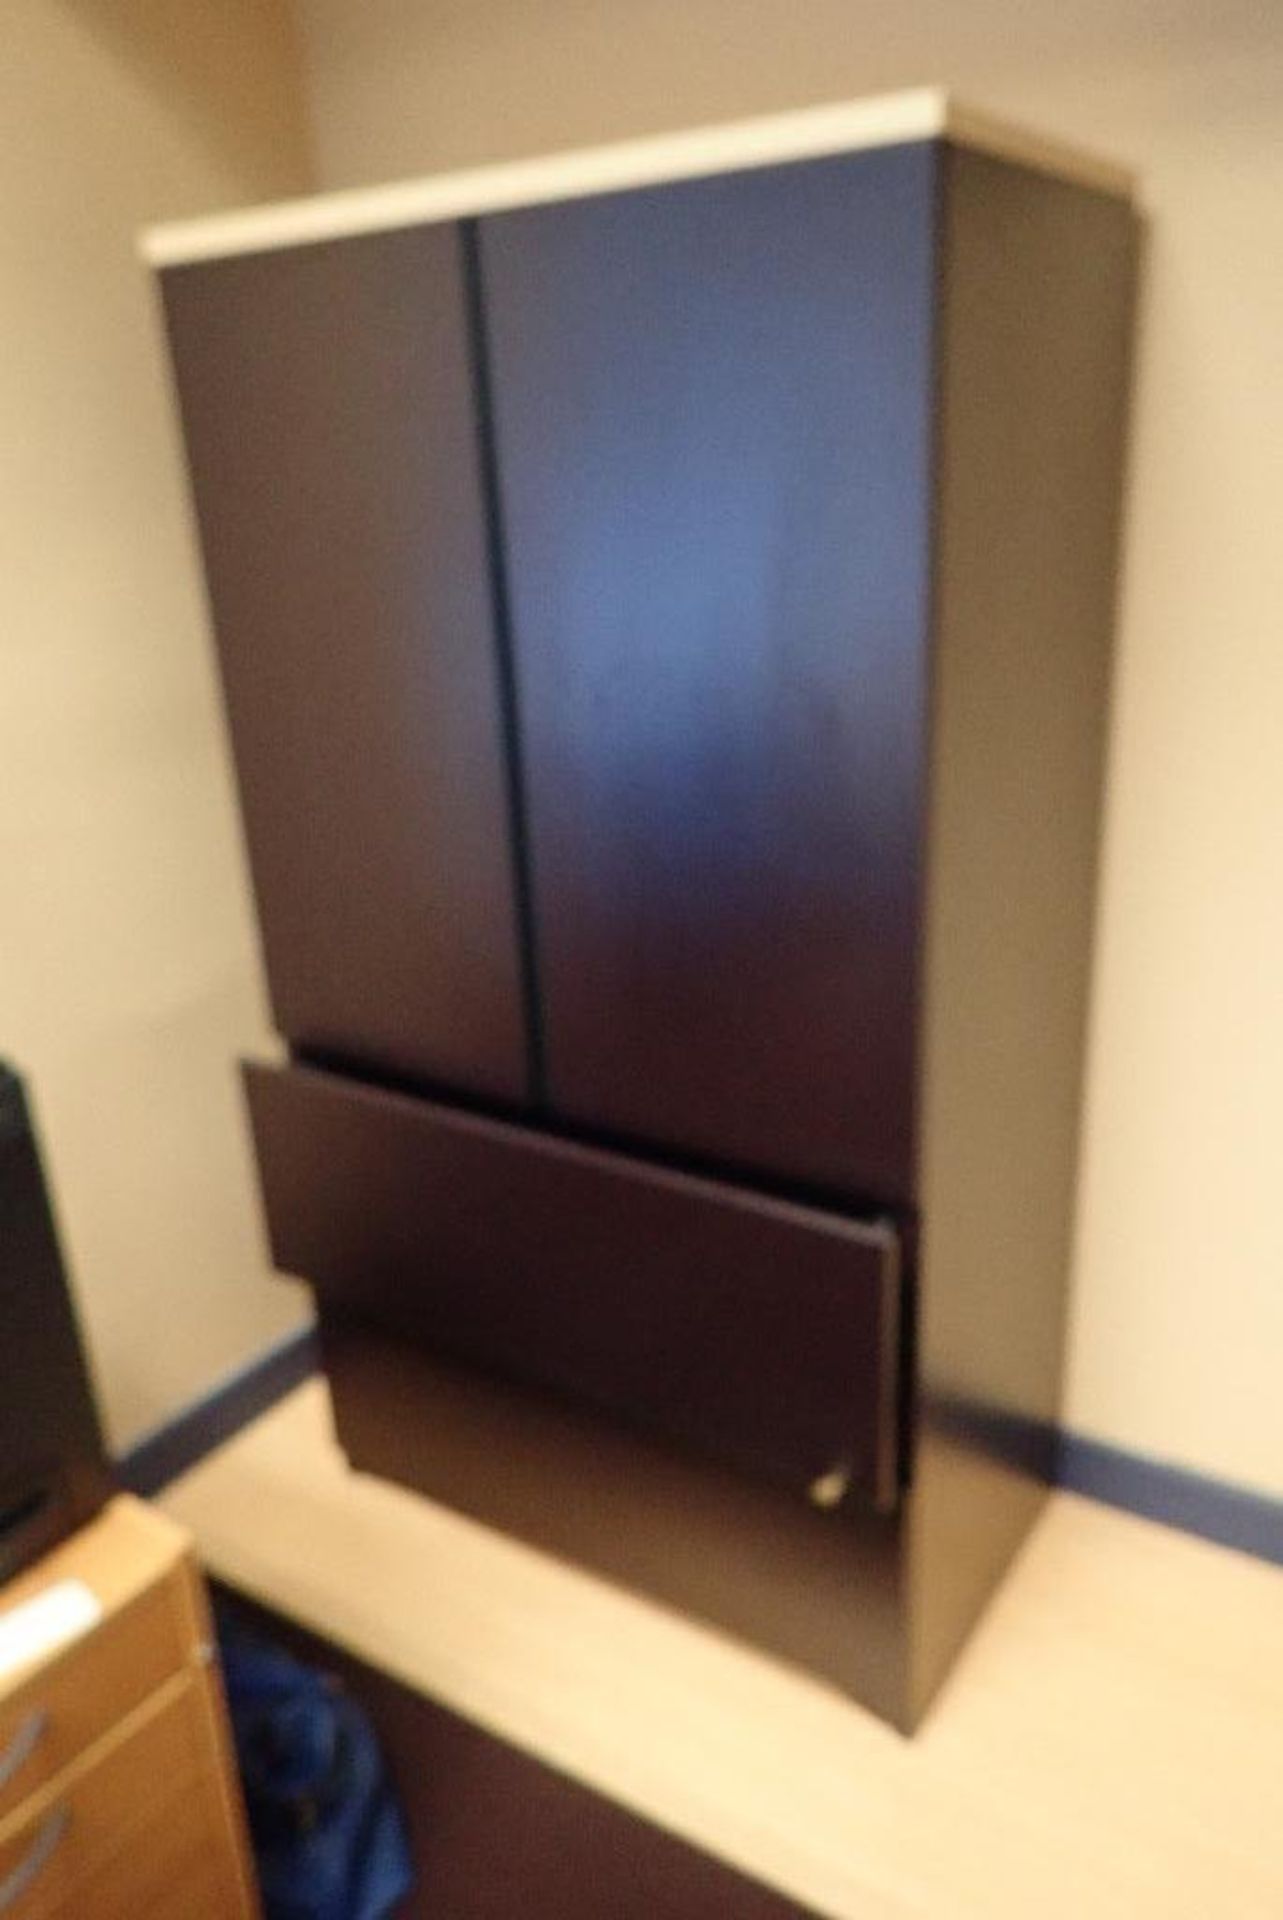 Contents of office, desk, chair, cabinet. **Rigging Fee: $150** (Located in Delta, BC Canada.) - Image 5 of 5